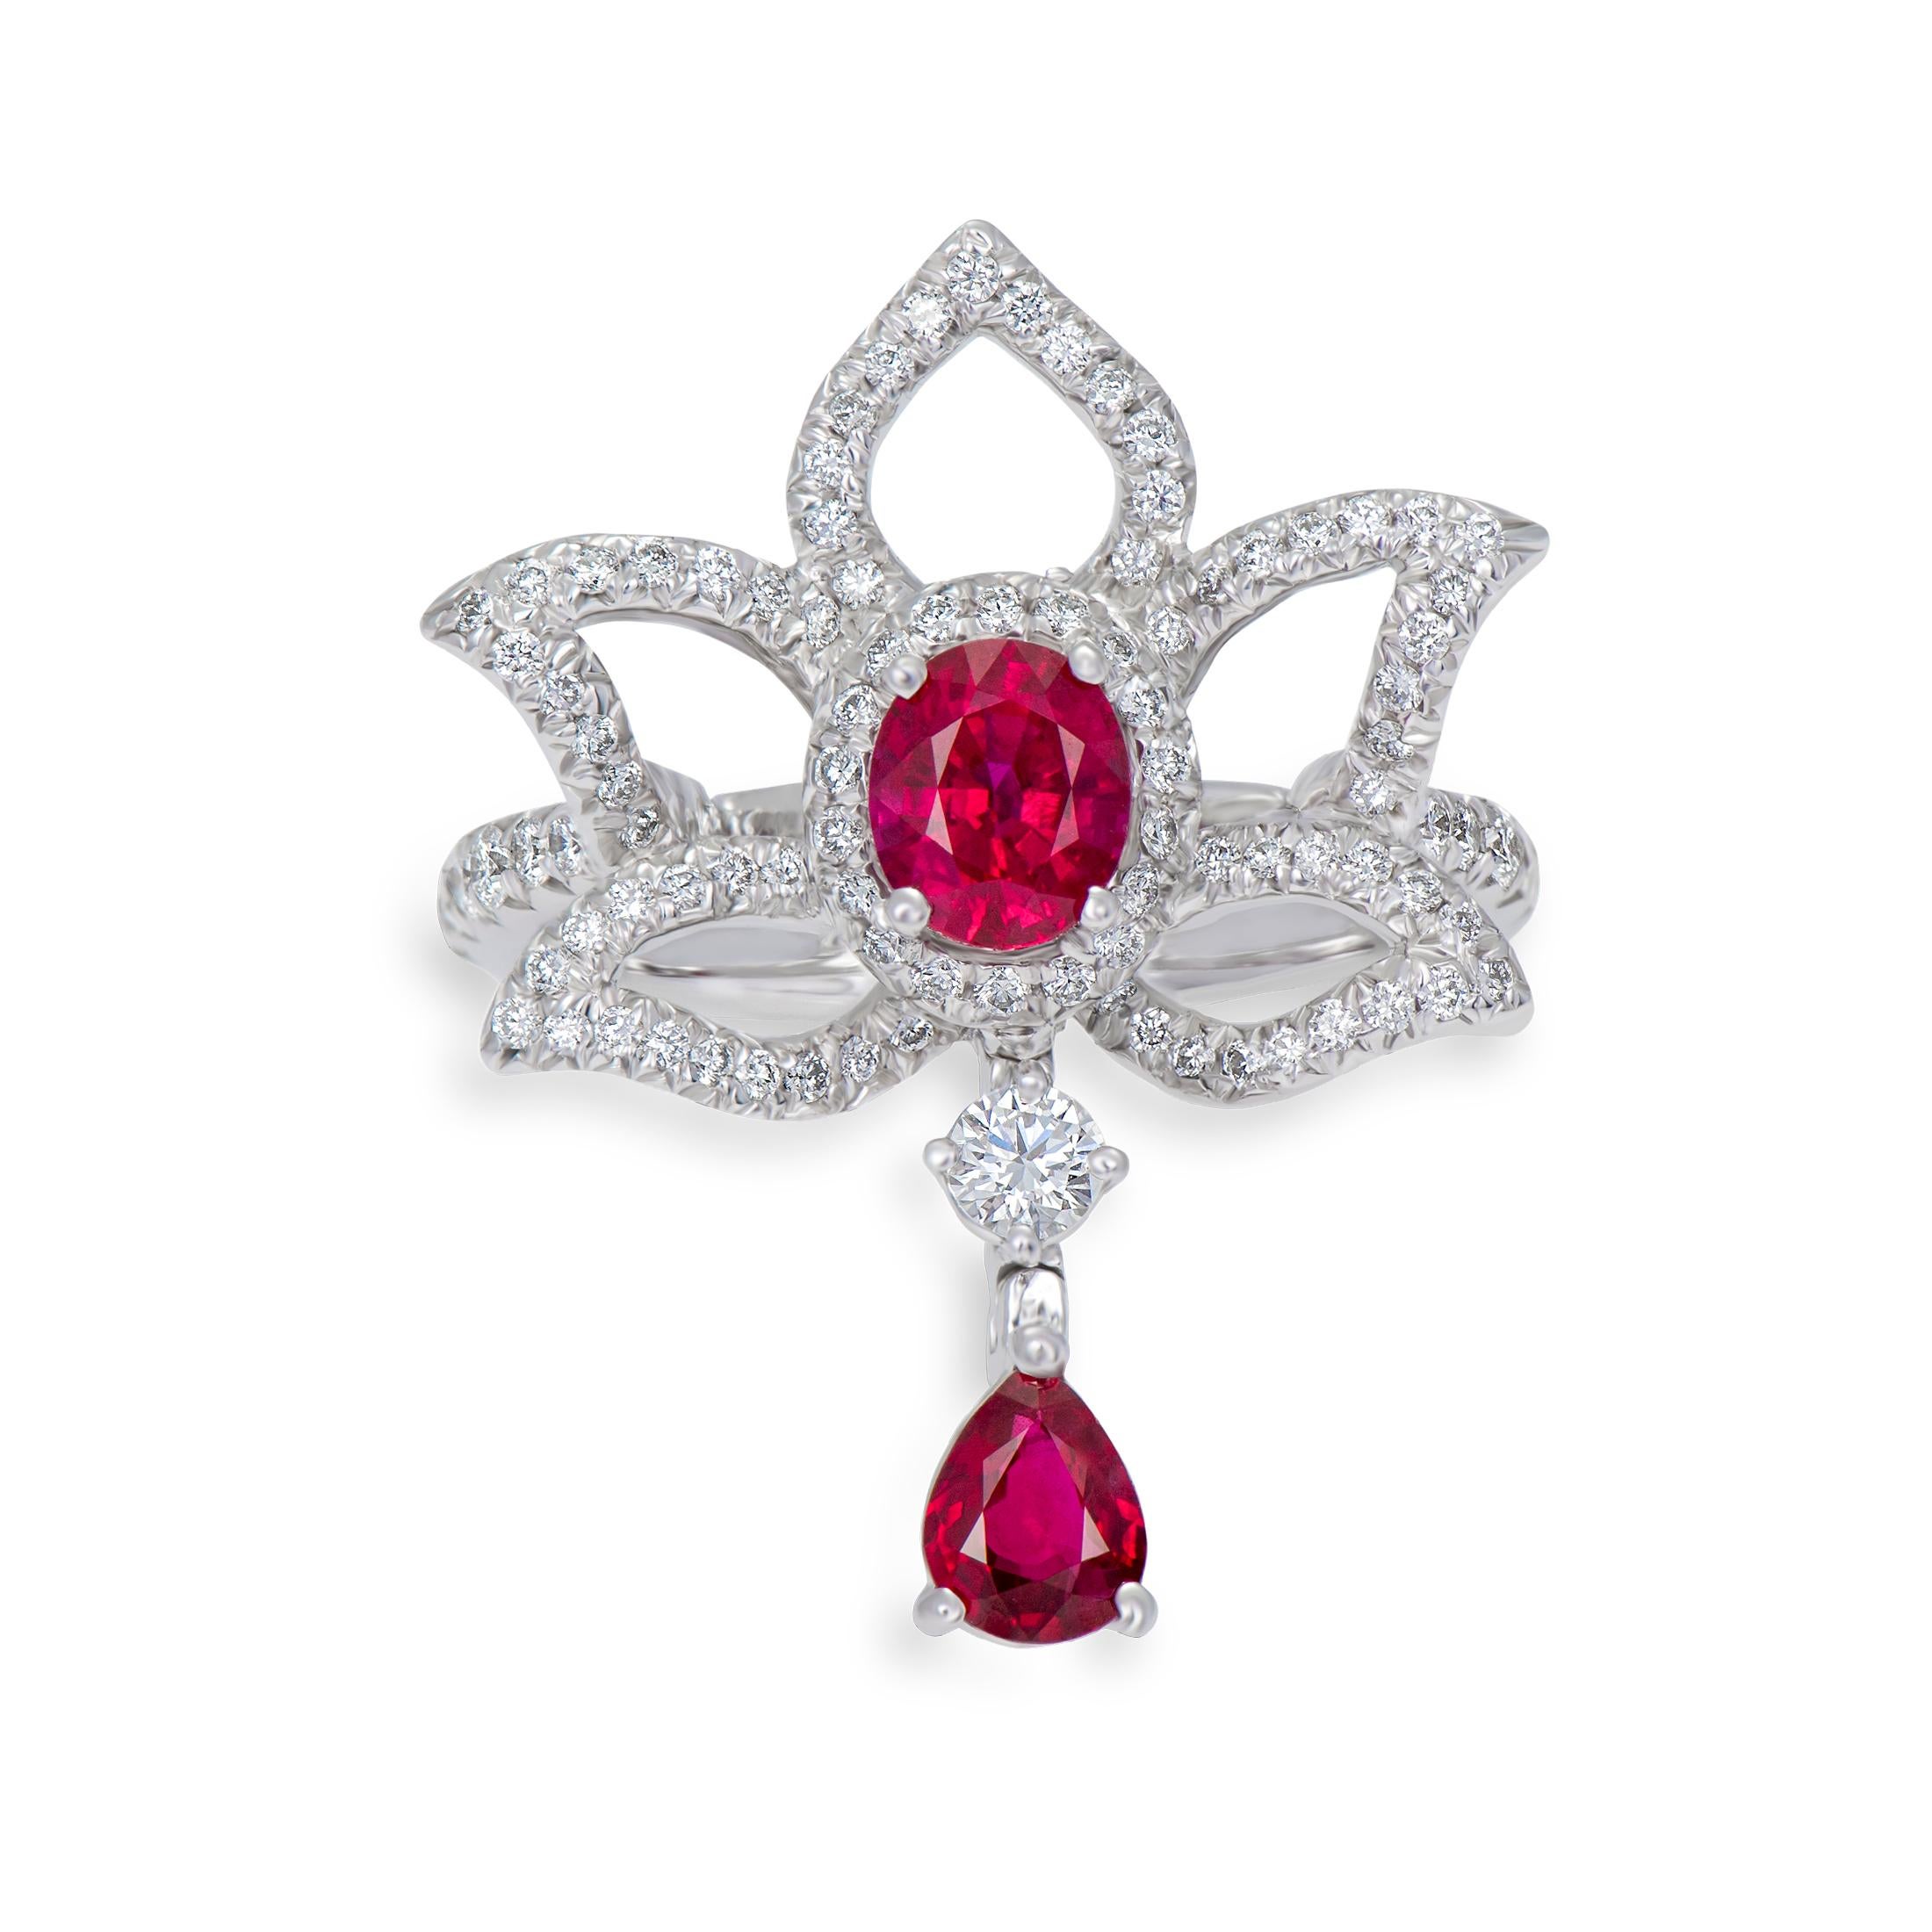 18 karat white gold ruby and diamond cocktail ring from Laviere's Venetian Red Collection. The ring is set with 1.03 carat of ruby and 0.6 carat of brilliant-cut diamonds. 

Gross Weight of the ring:  6.50 grams. The ring is accompanied by the